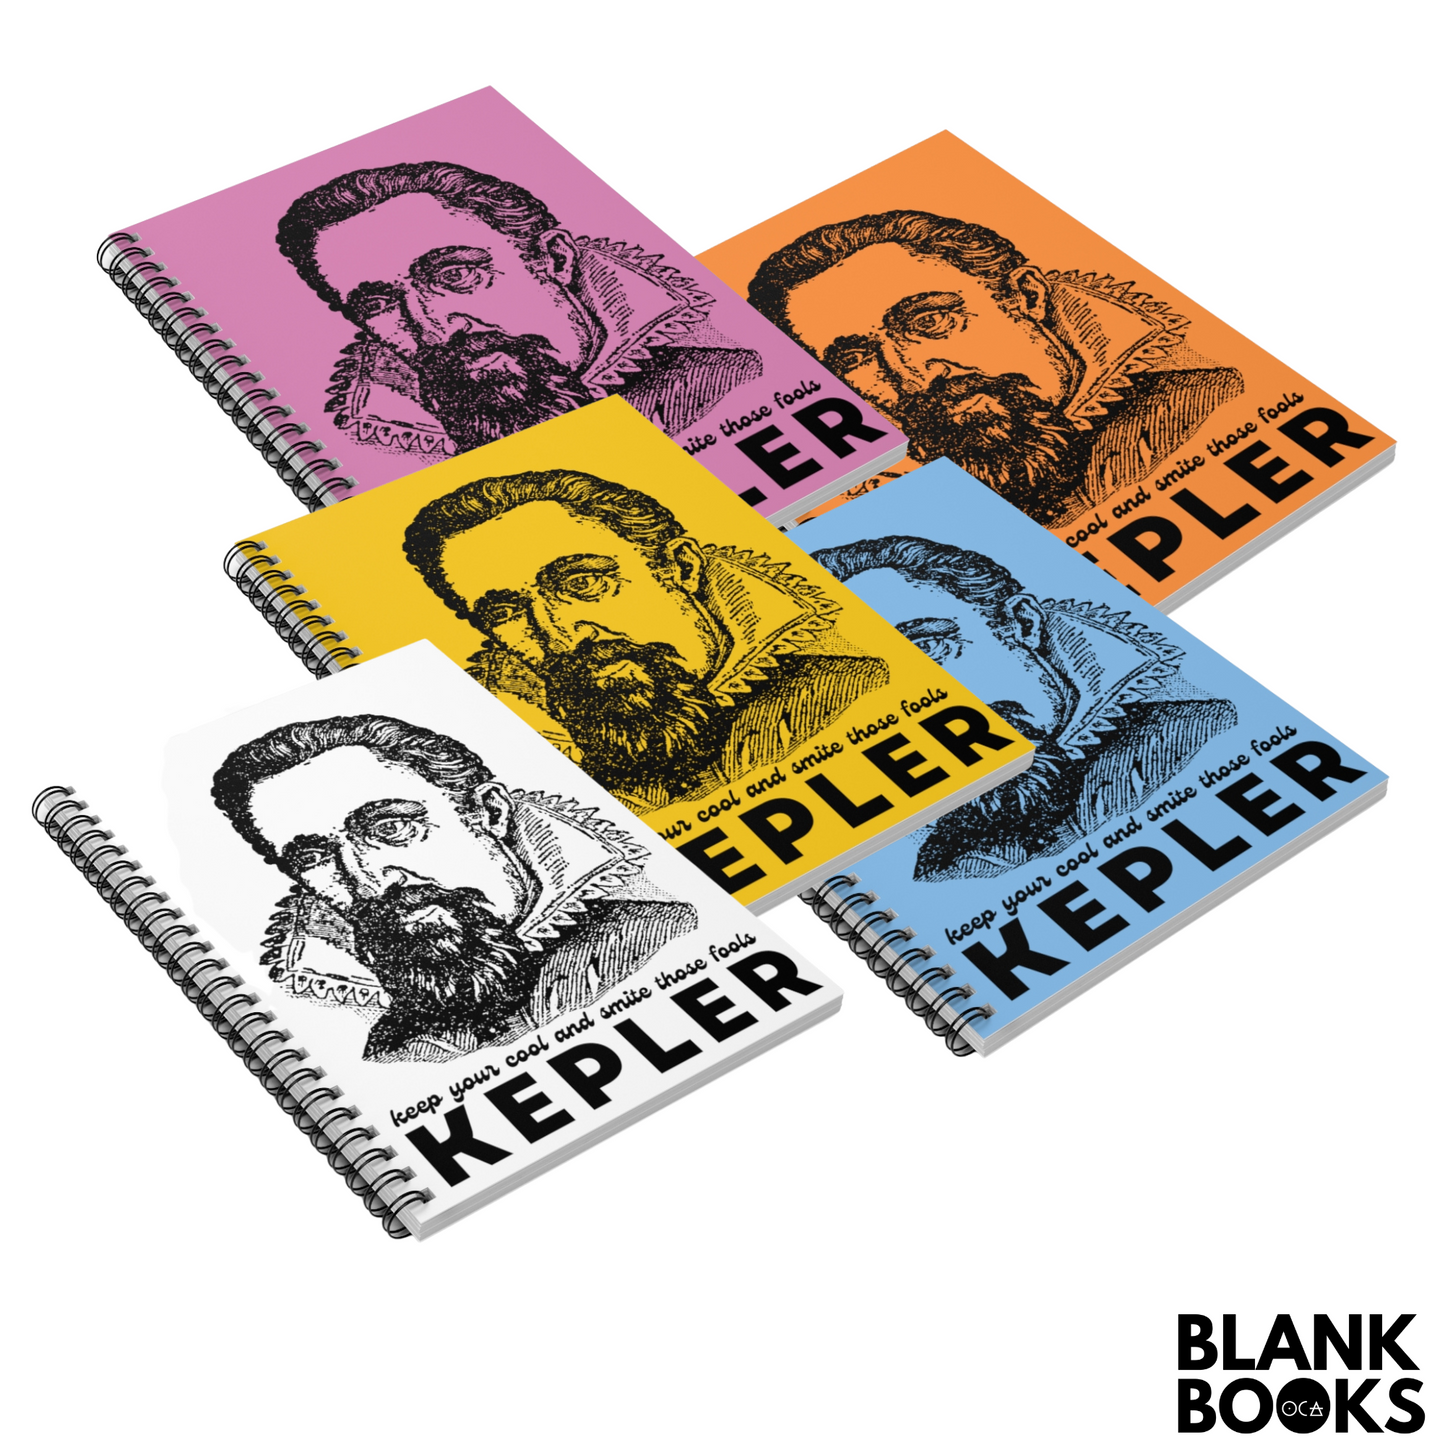 Kepler Journal (Blank Book/Lined Pages/5 Color Options)